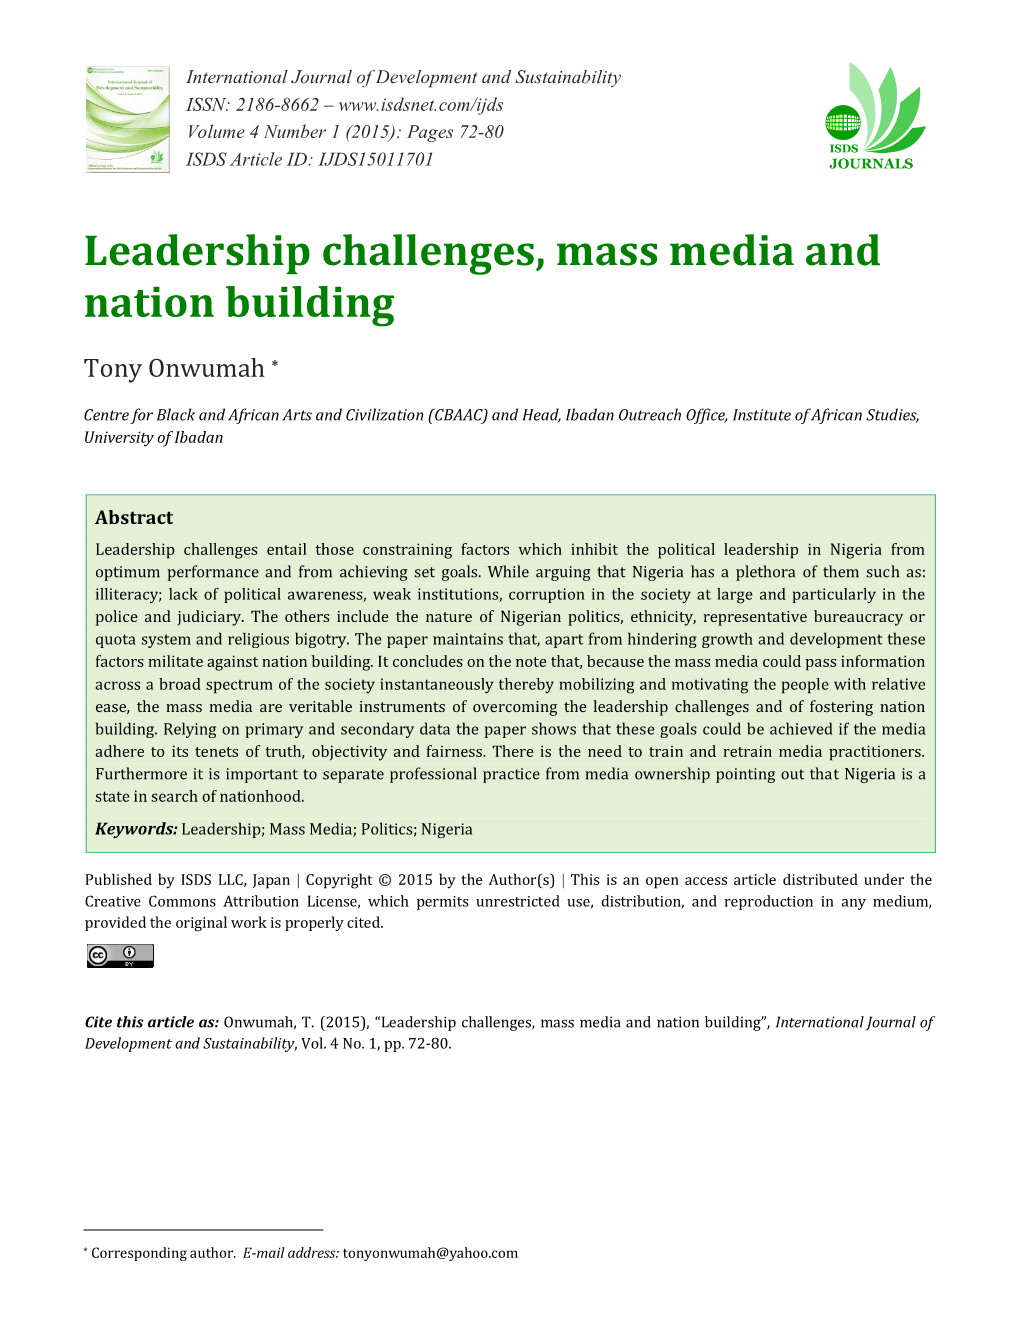 Leadership Challenges, Mass Media and Nation Building